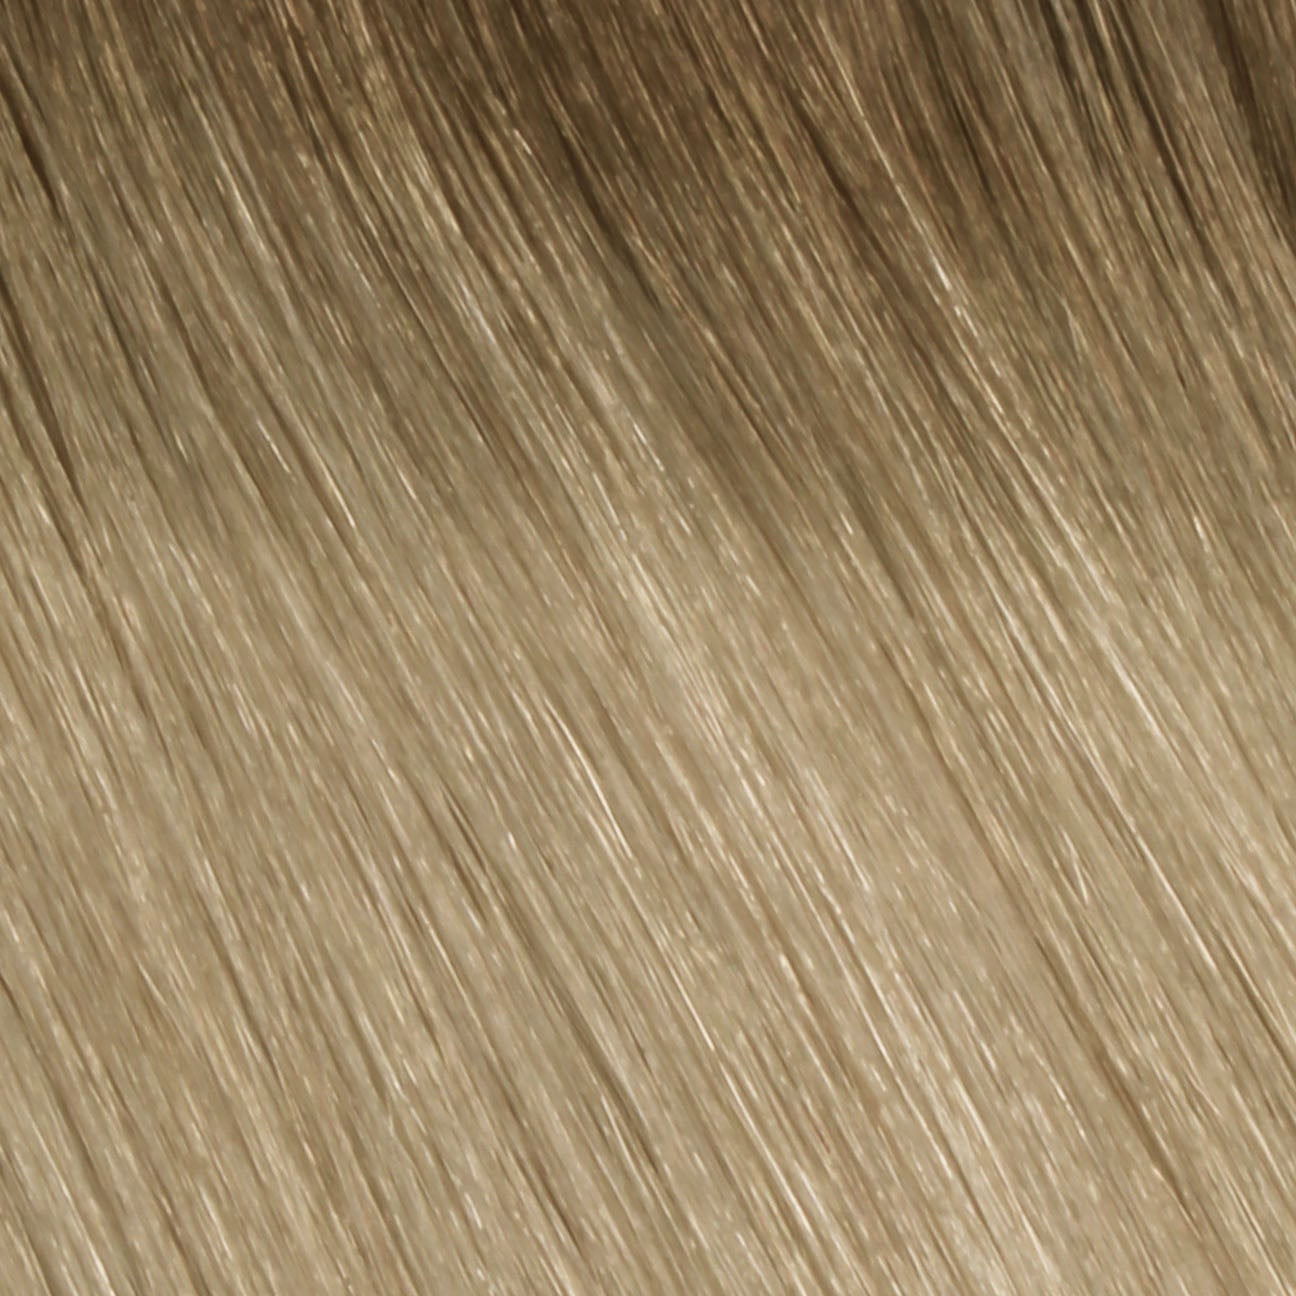 Nano Bonds 20 Inches - SWAY Hair Extensions Rooted-Hollywood-Blonde-R8-18-613 Ultra-fine, invisible bonds for a flawless, natural look. 100% Remy Human hair, lightweight and versatile. Reusable and perfect for individual or salon use.